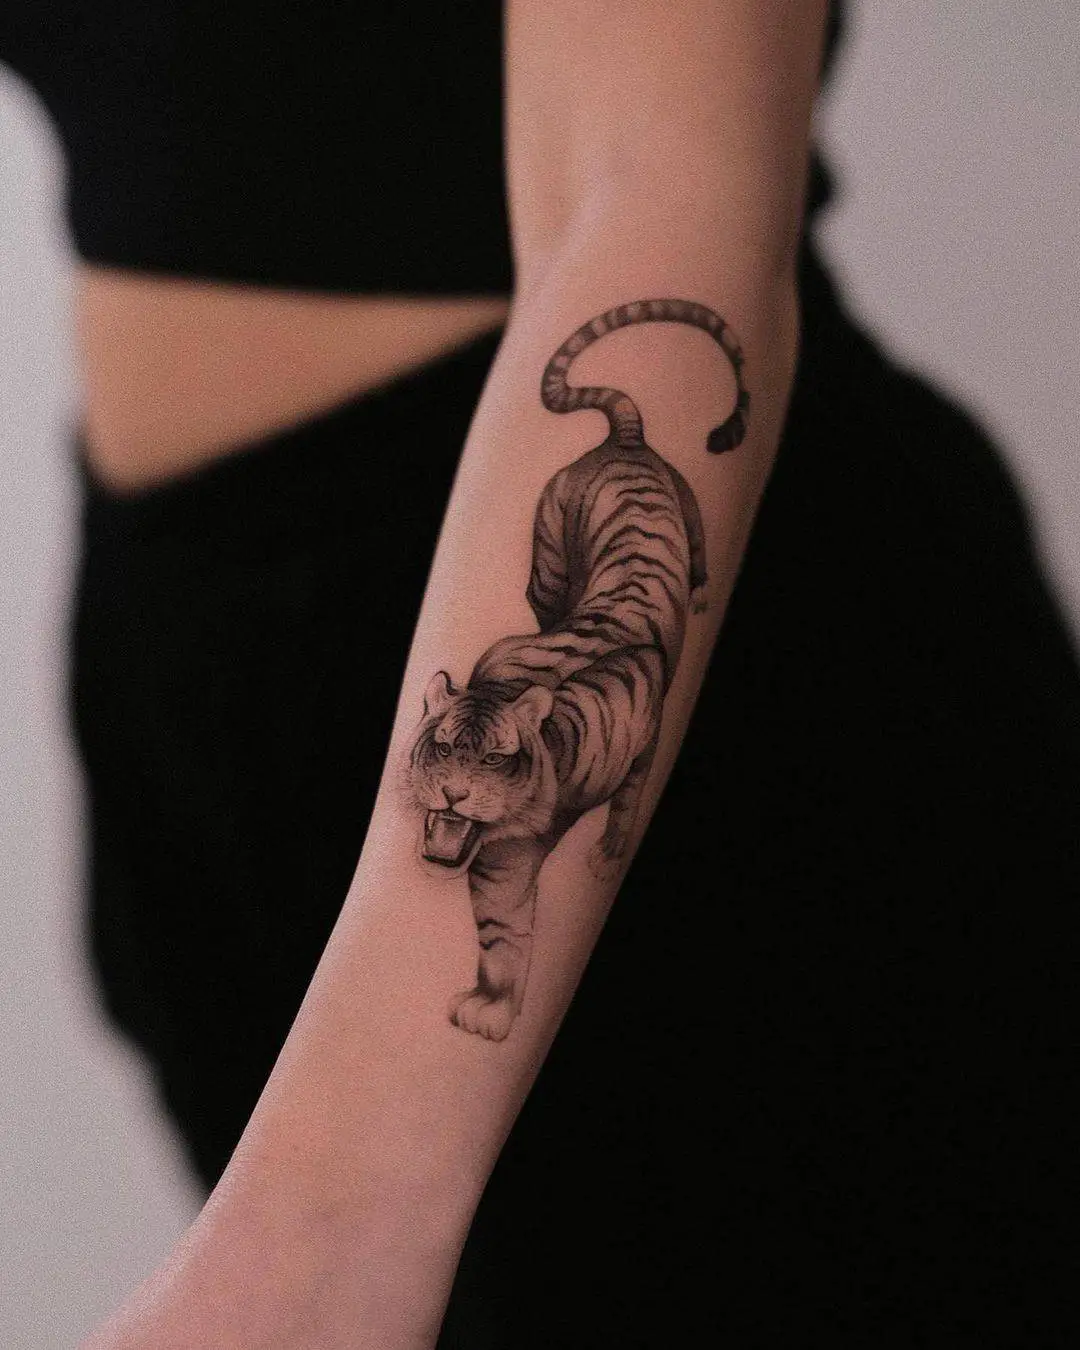 Impressive Tiger Tattoo Ideas For The Lower Arm